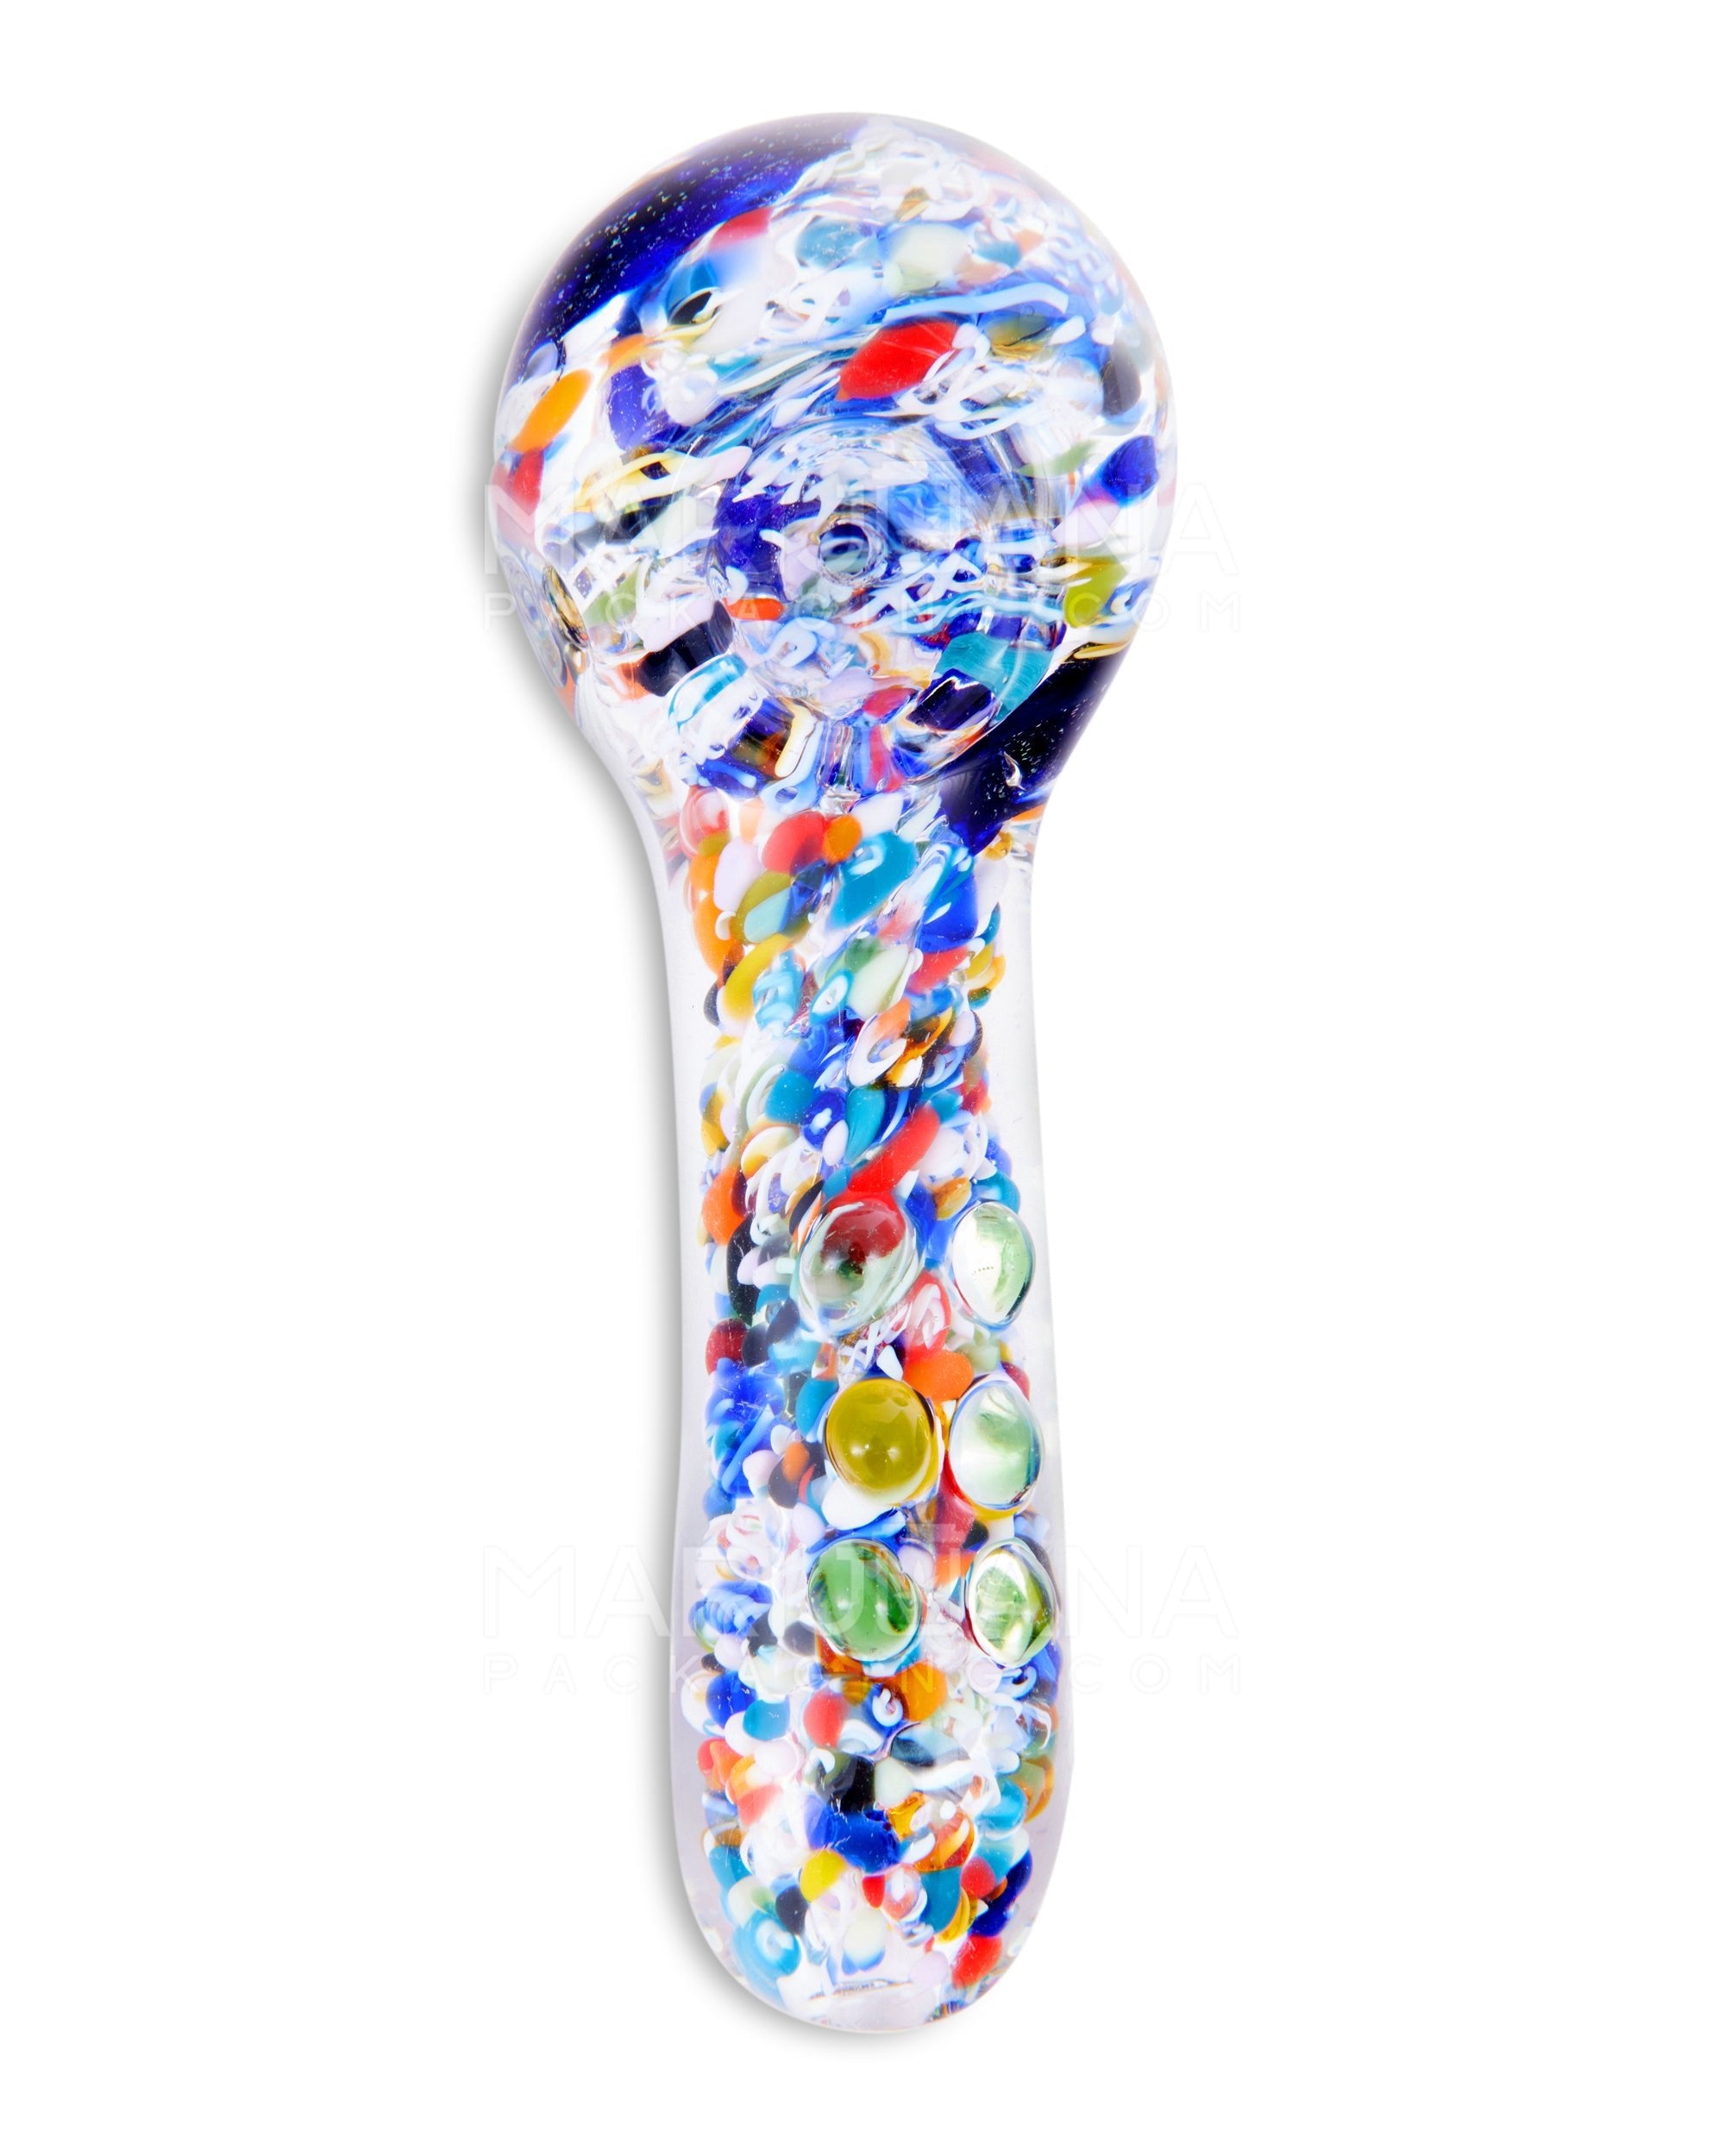 Frit & Dichro Spoon Hand Pipe w/ Multi Knockers | 4.5in Long - Glass - Assorted - 2